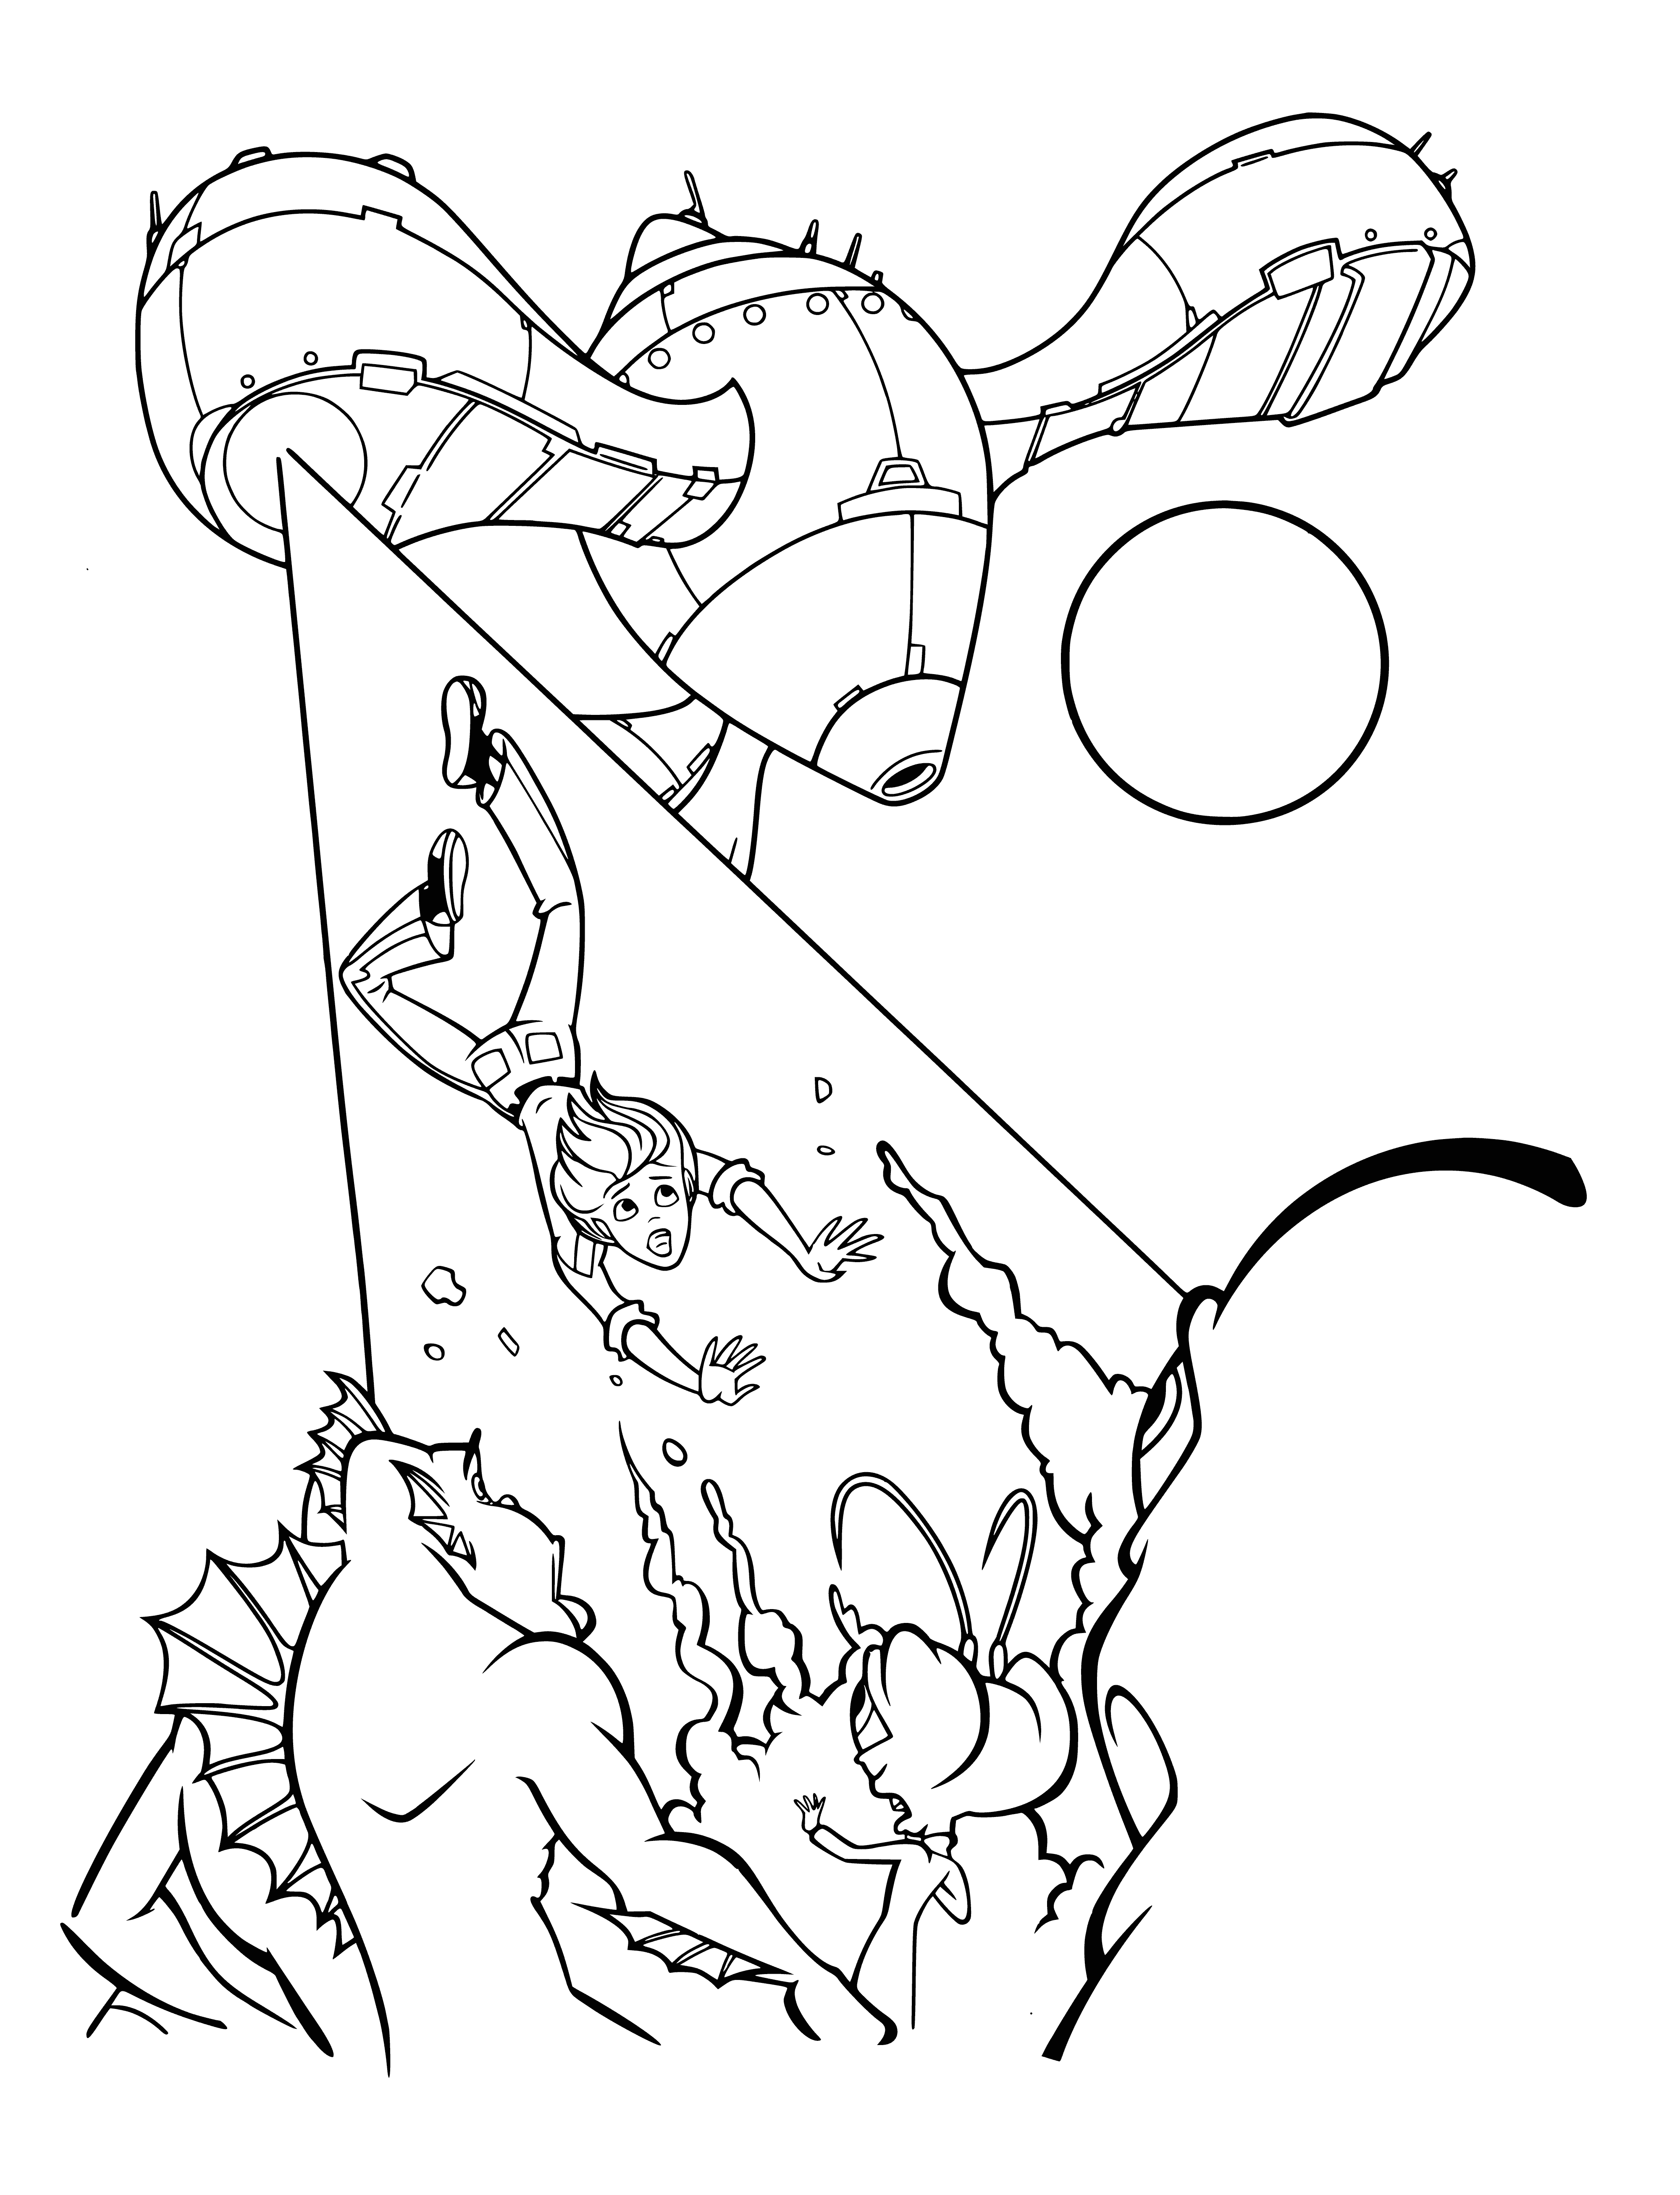 coloring page: Aliens are kidnapping a giant purple creature with a ray gun in this coloring page, but Gigantika is fighting back!